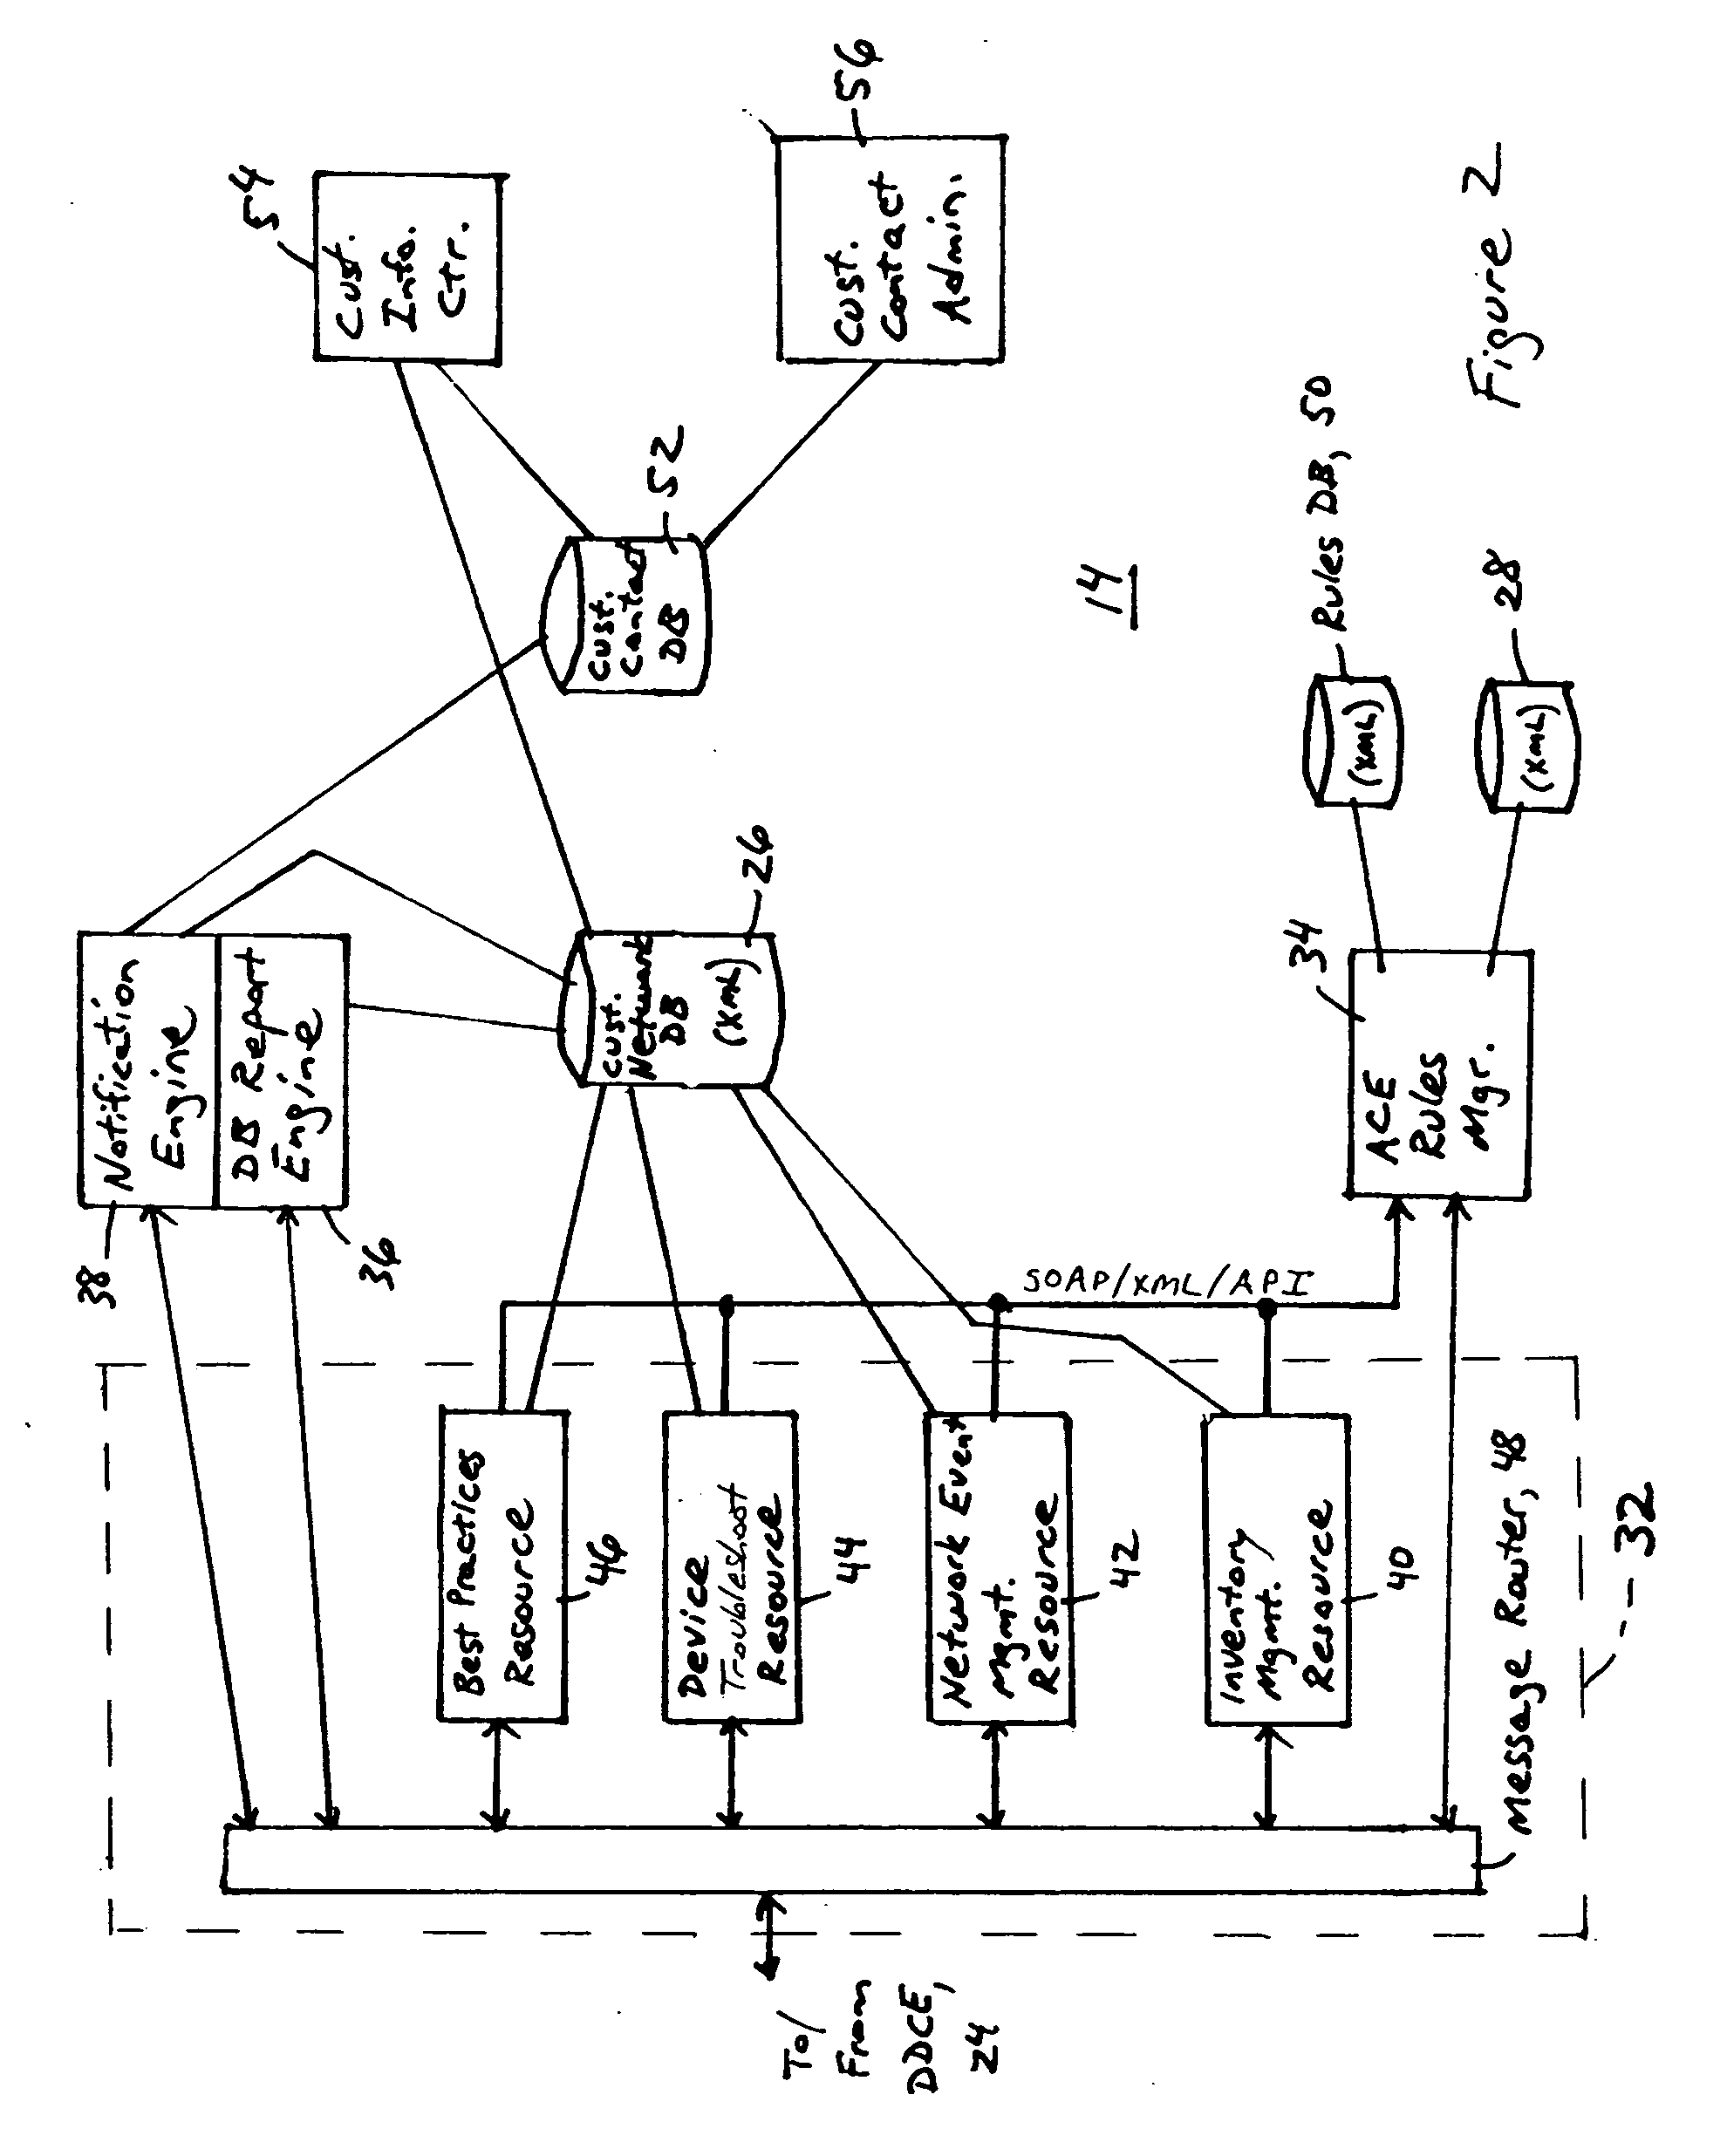 Arrangement for automated fault detection and fault resolution of a network device